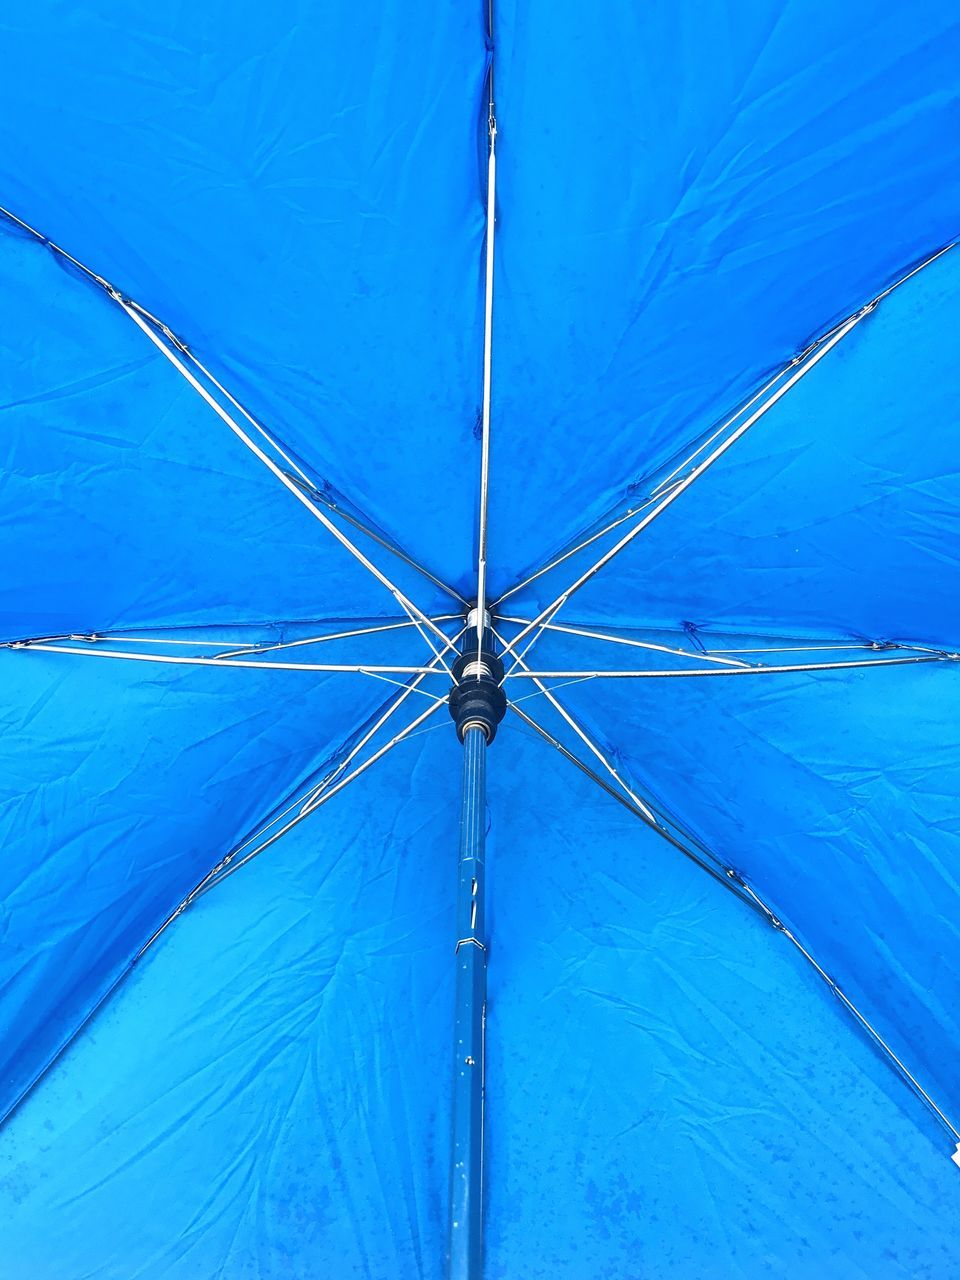 blue, full frame, no people, day, outdoors, protection, low angle view, backgrounds, shelter, symmetry, close-up